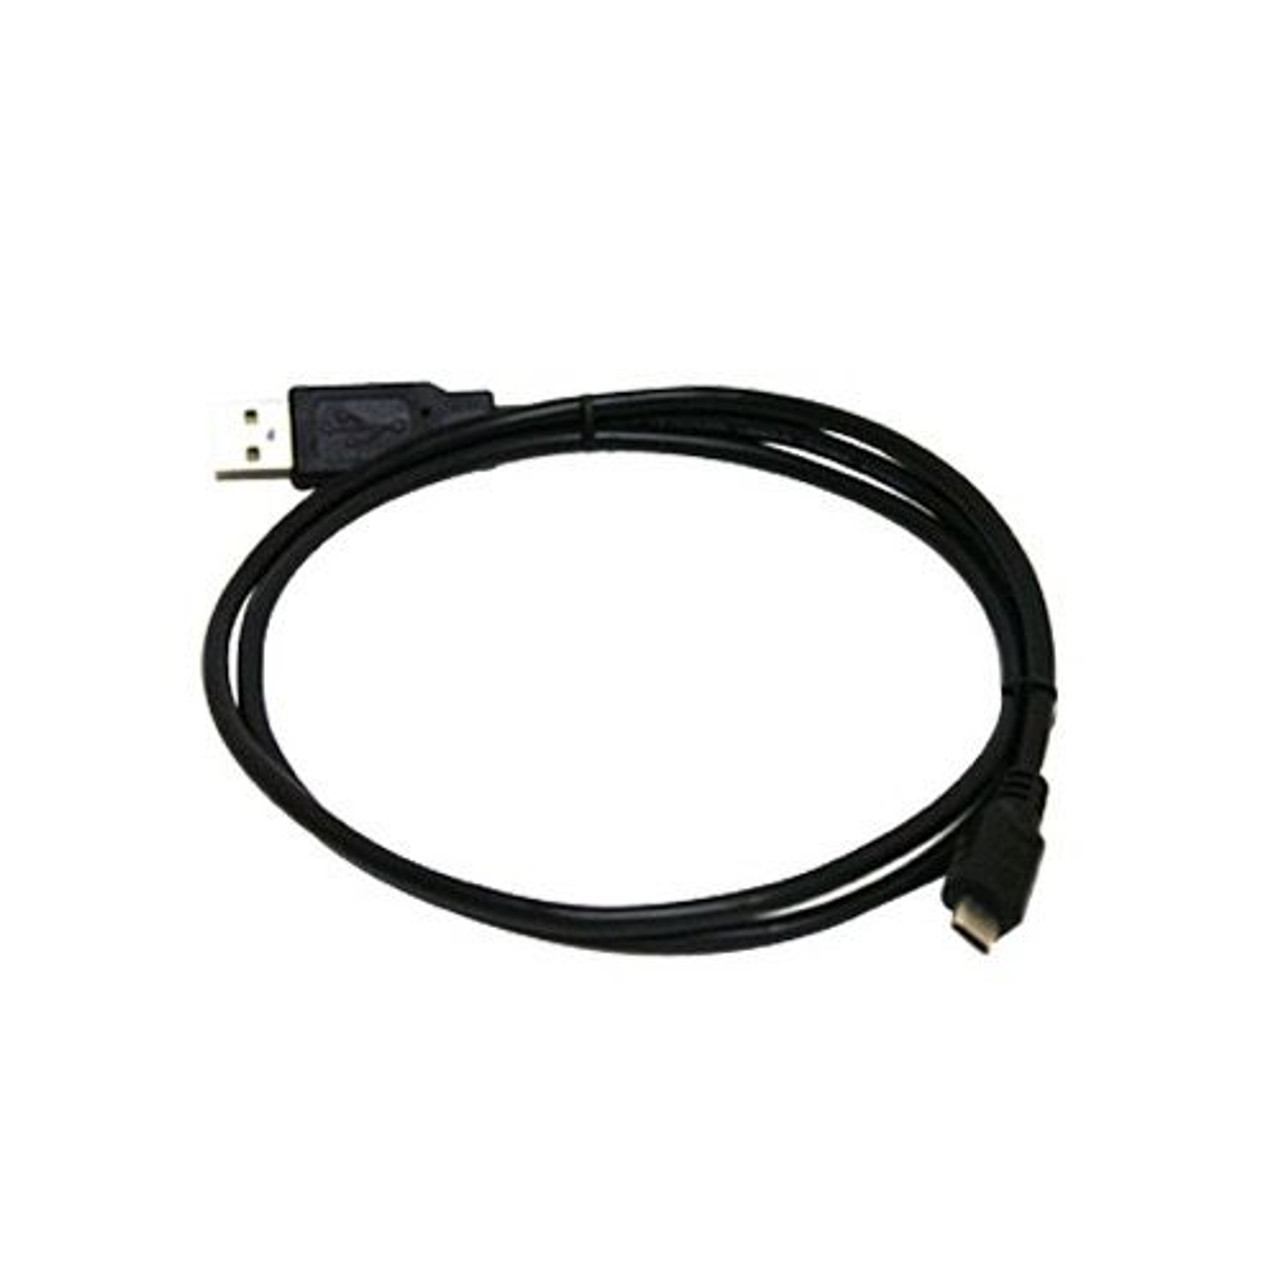 Eagle 6 FT USB A To Micro B Male To Male Cable 2.0 Black Data Cable Cell Phone Camera MP3 Player PDA